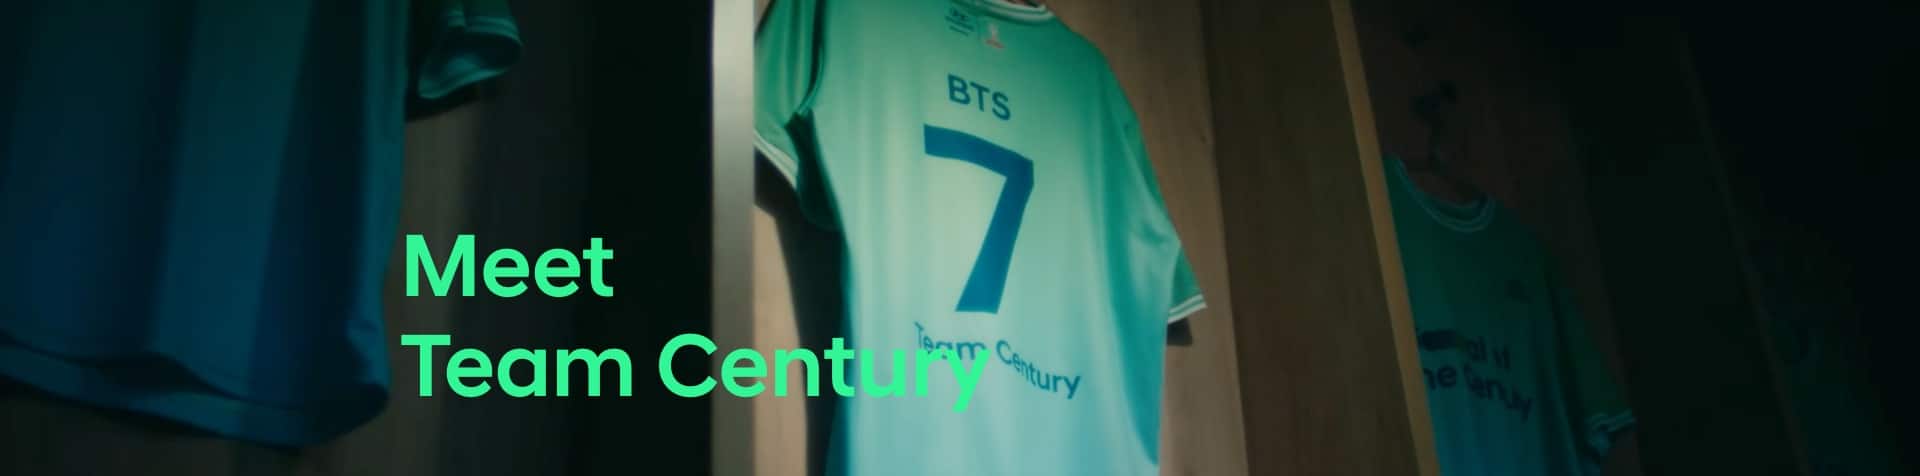 The Team Century jersey belonging to BTS with the number 7 on it hanging up in the changing room. “Meet Team Century” is written in green across the image.